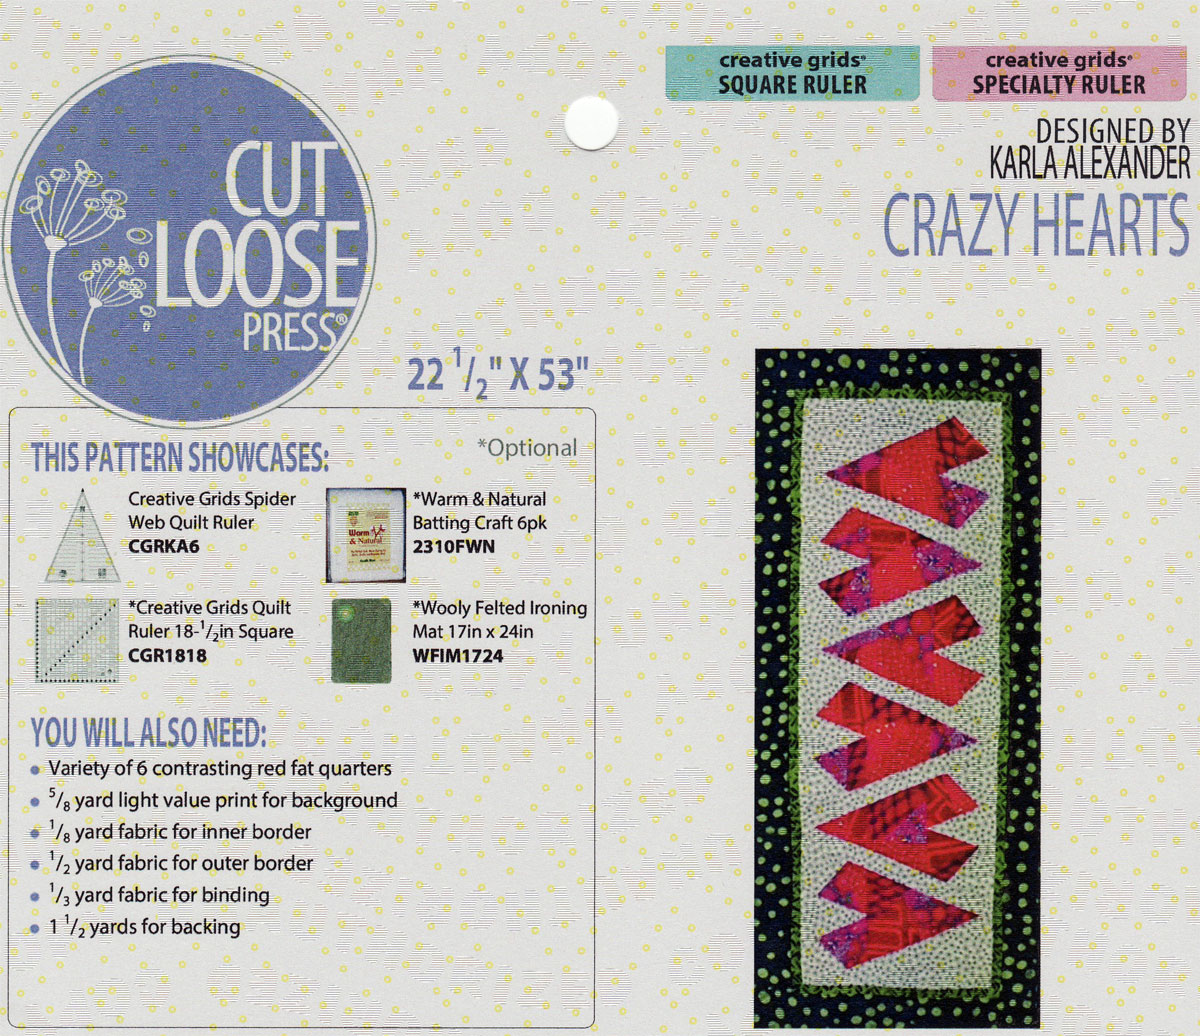 crazy-hearts-sewing-pattern-Cut-Loose-Press-front